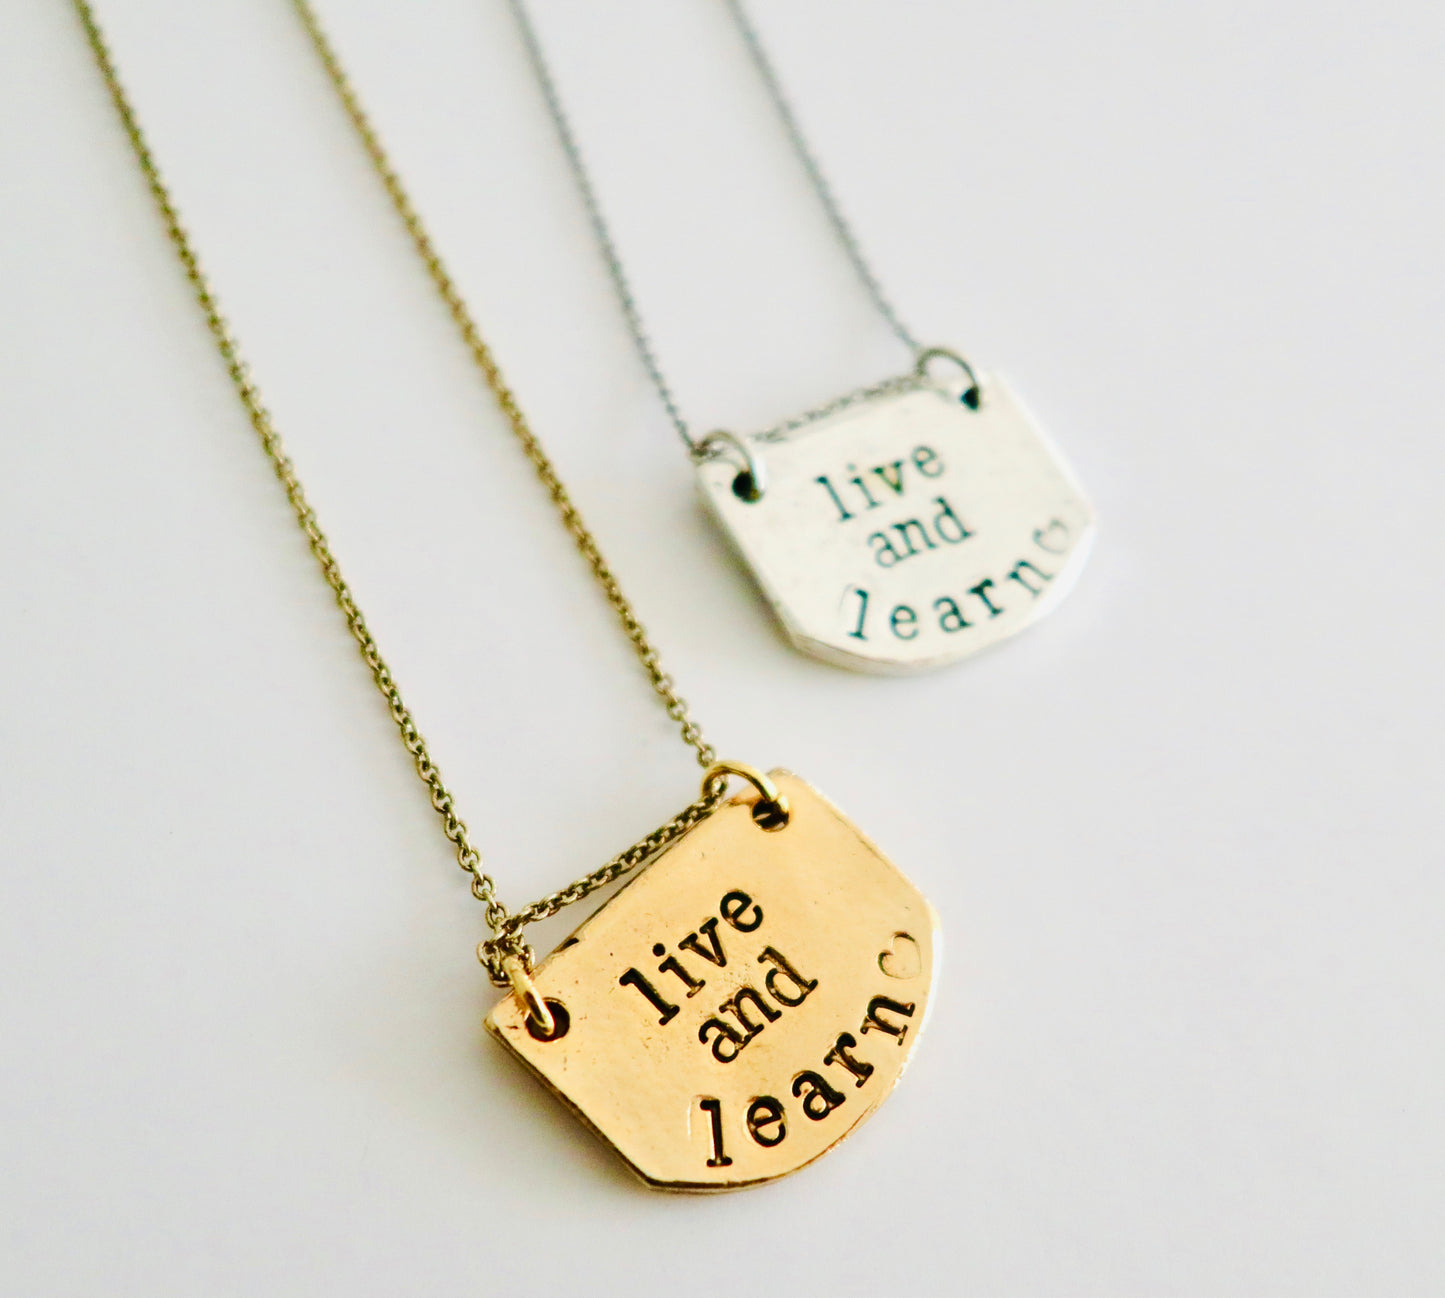 LIVE AND LEARN NECKLACE